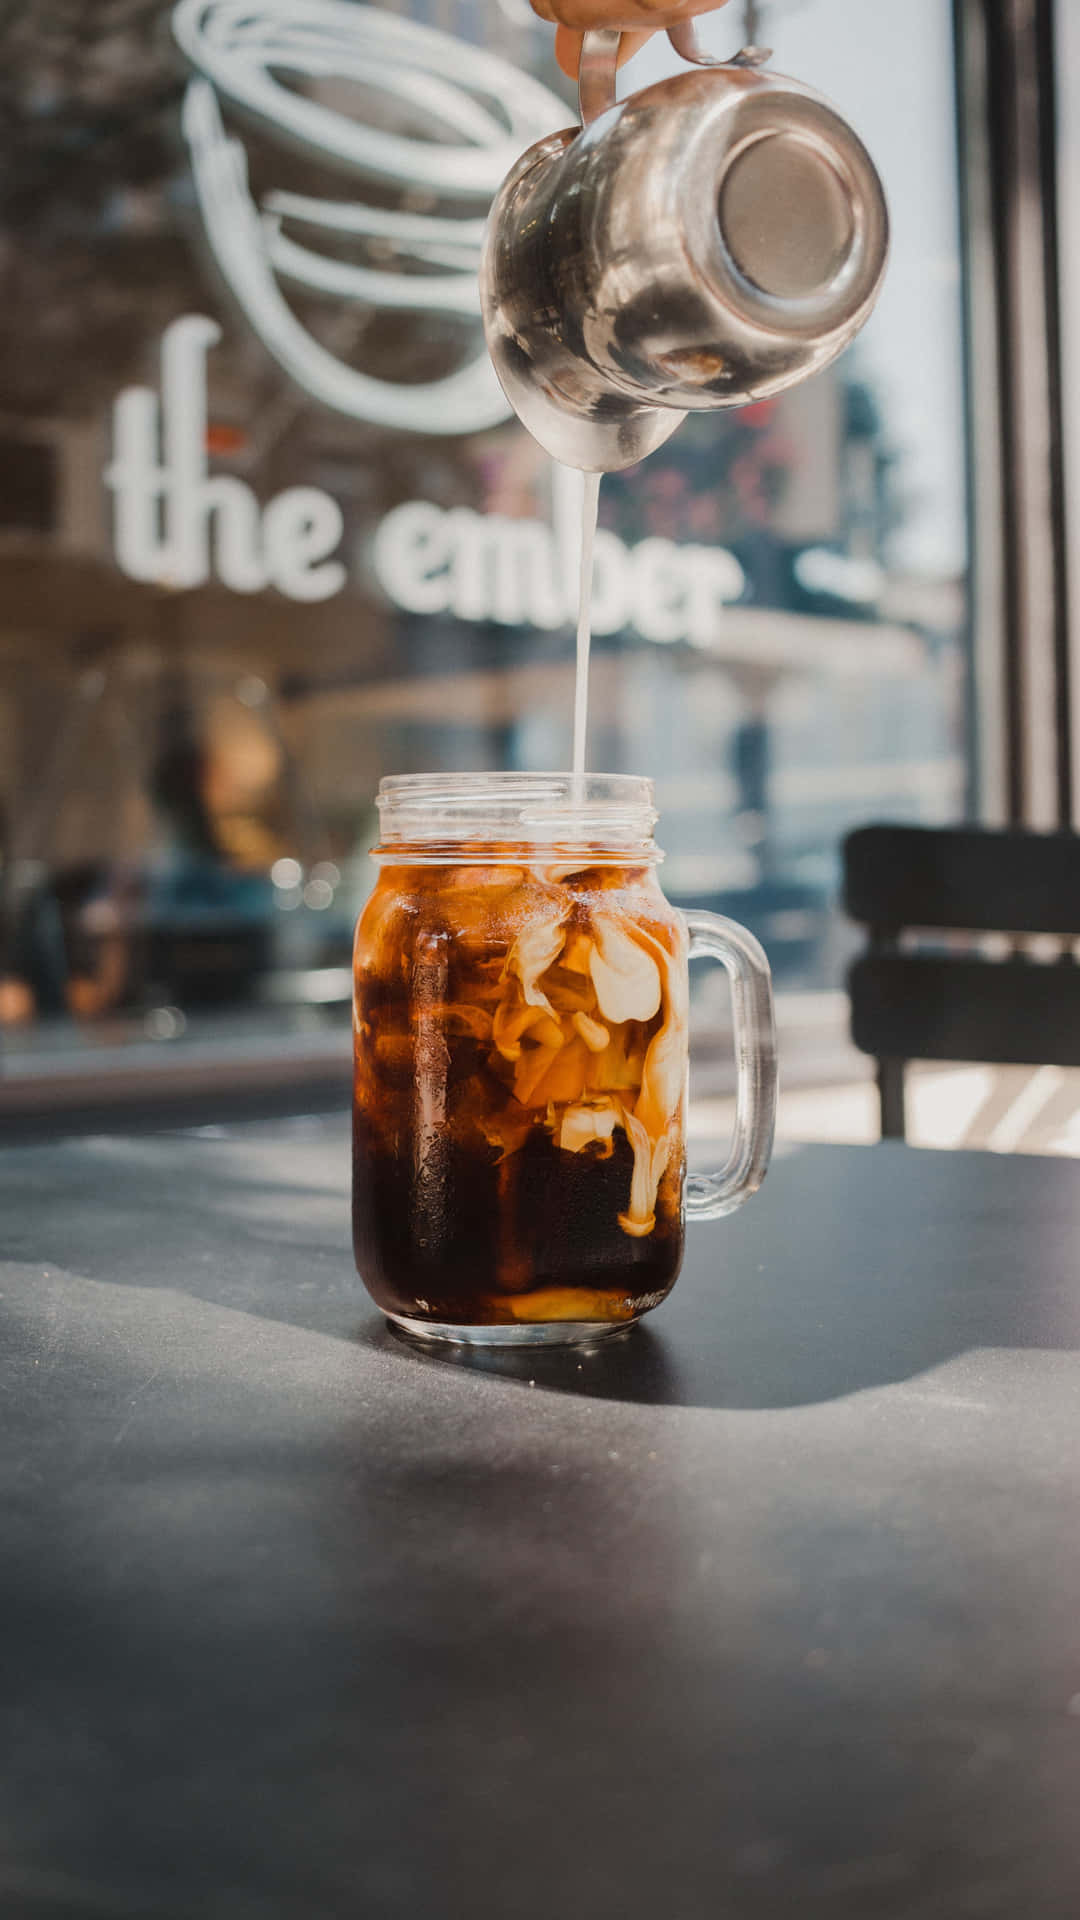 Enjoy an energizing and delicious iced coffee